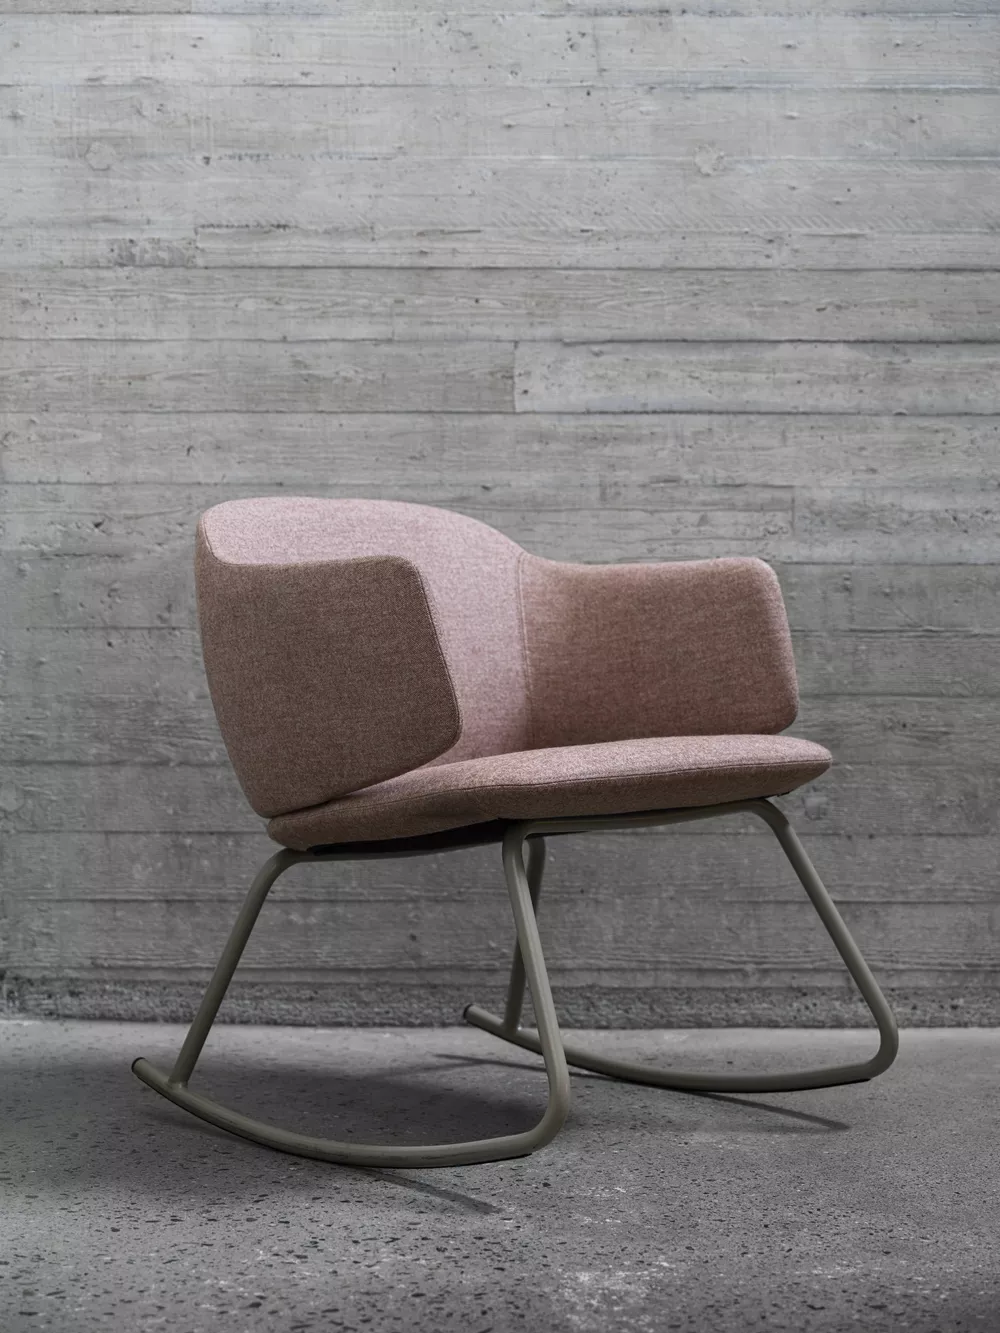 A Pink Dwell rocker from Fora Form